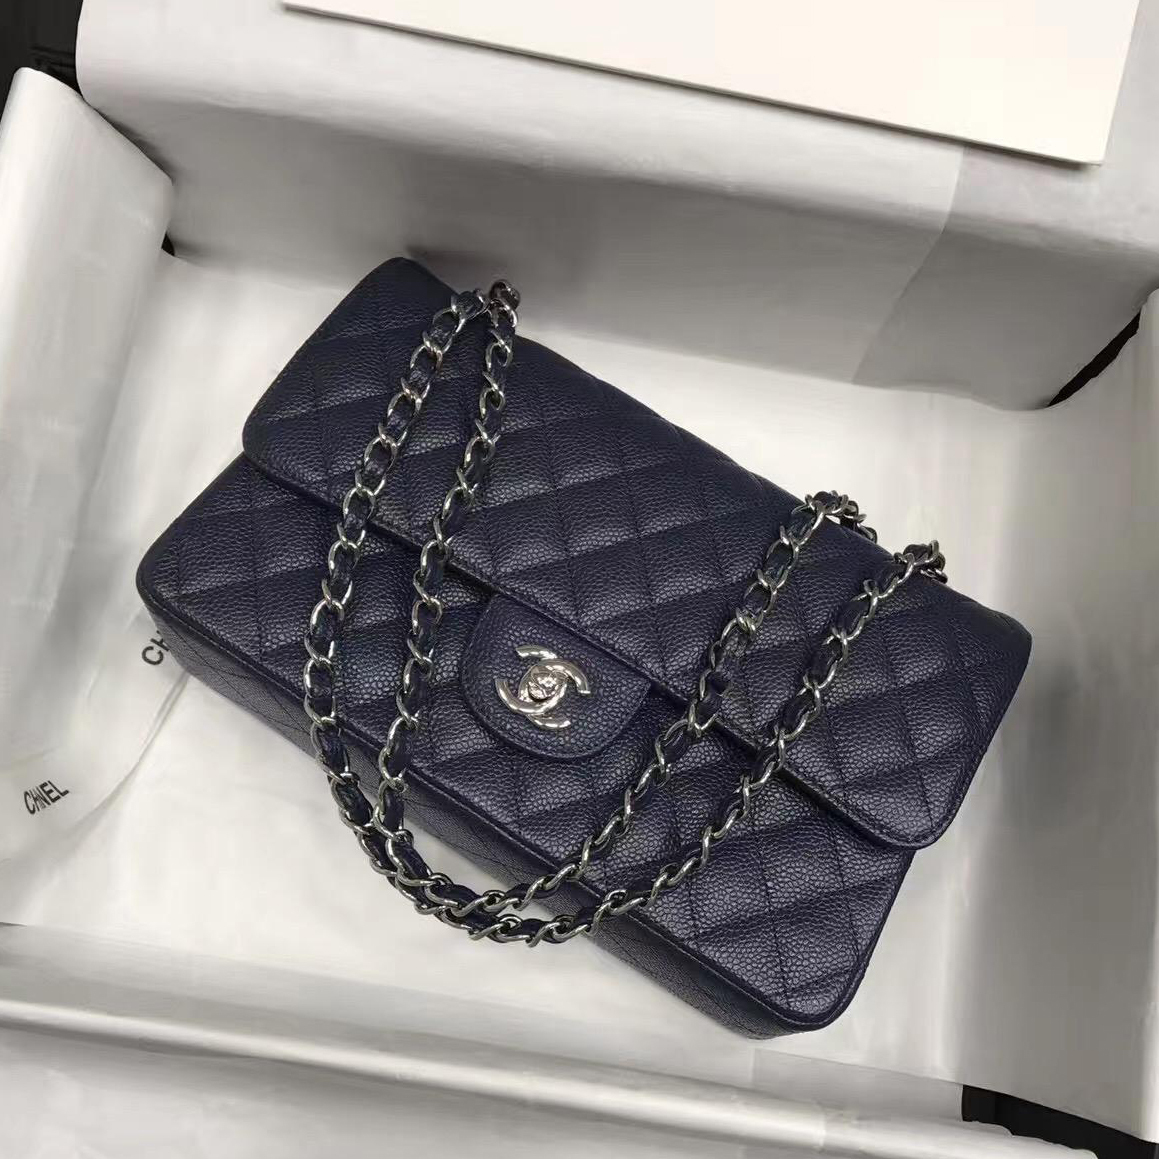 Chanel Bags Switch from Serial Stickers to Microchips in 2021  Madison  Avenue Couture